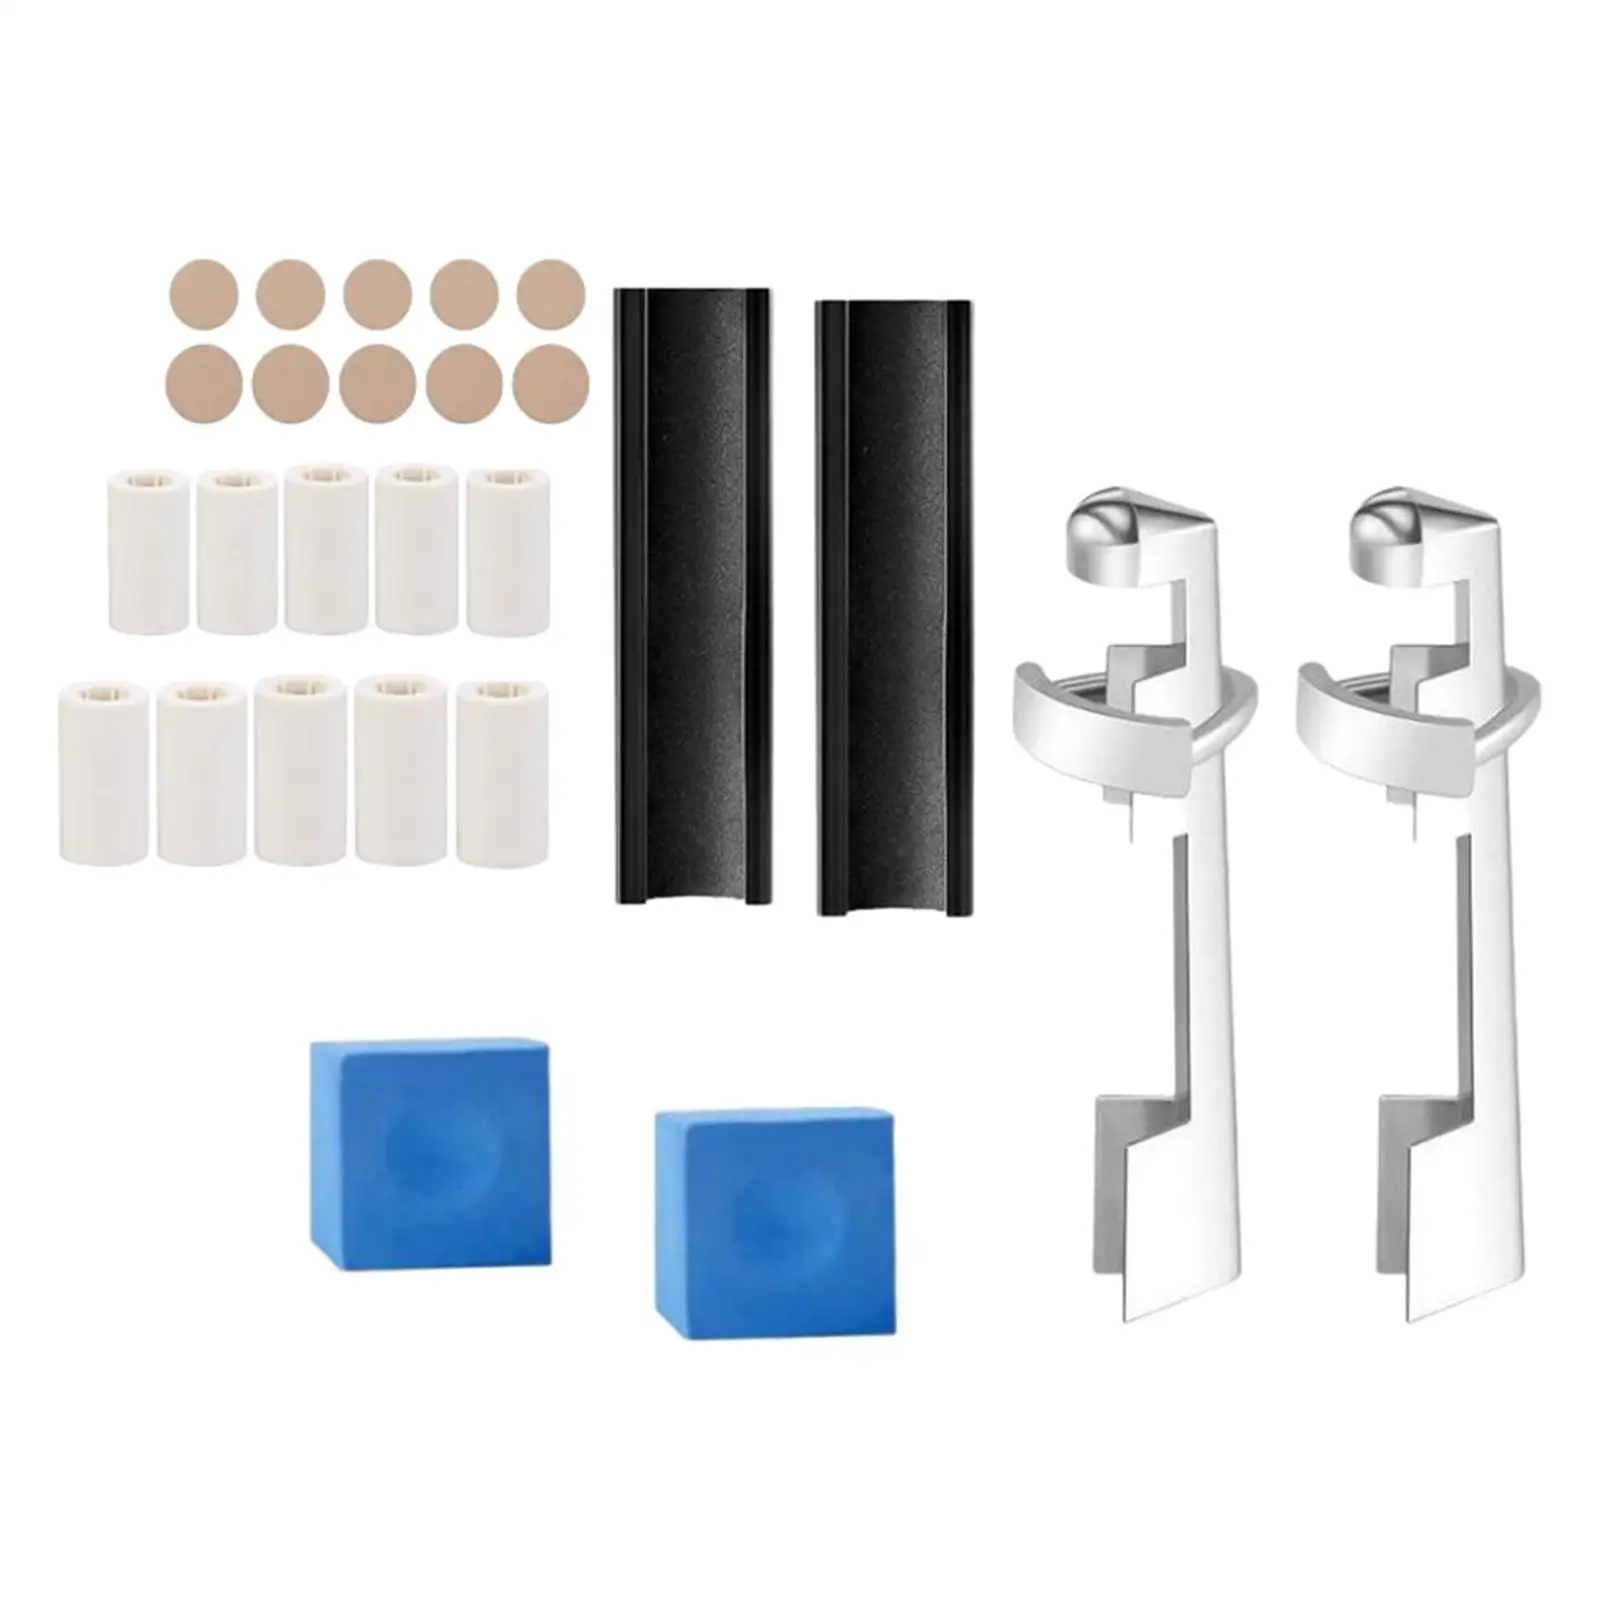 26x Pool Cue Tip Repair Kit Pool Cue Tip Clamp 22mm Chalk Cubes for Beginners Playing Game Training Outdoor Sports Practice